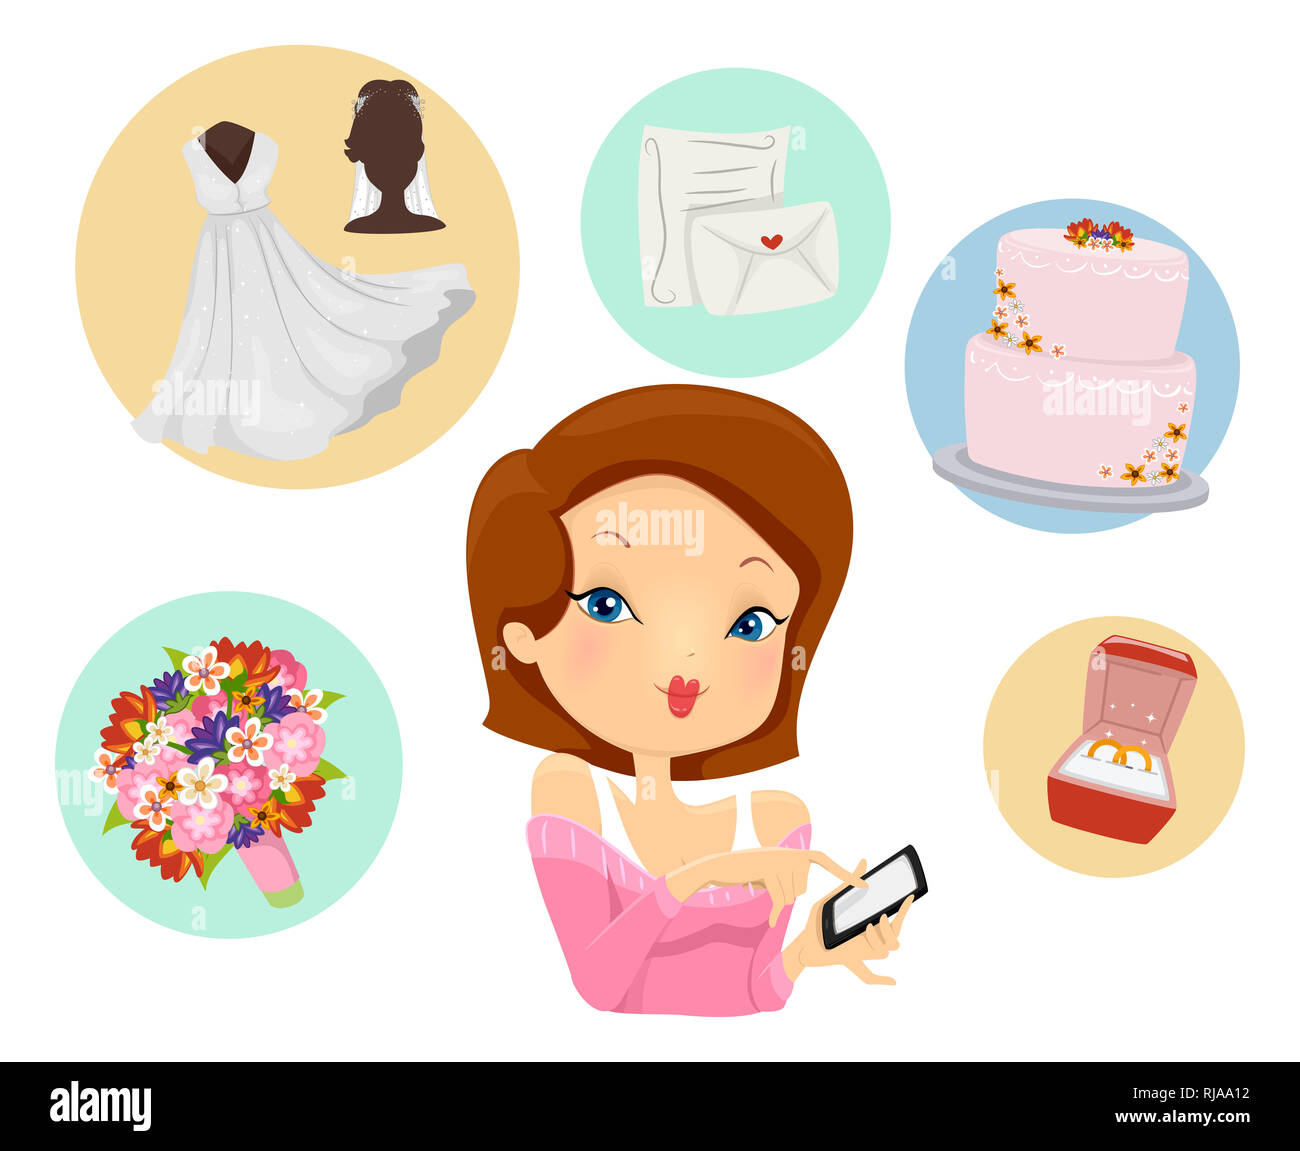 Illustration of a Girl Holding a Mobile Phone with App Showing Wedding Icons from Bouquet, Bridal Gown, Invitation, Cake and Rings Stock Photo